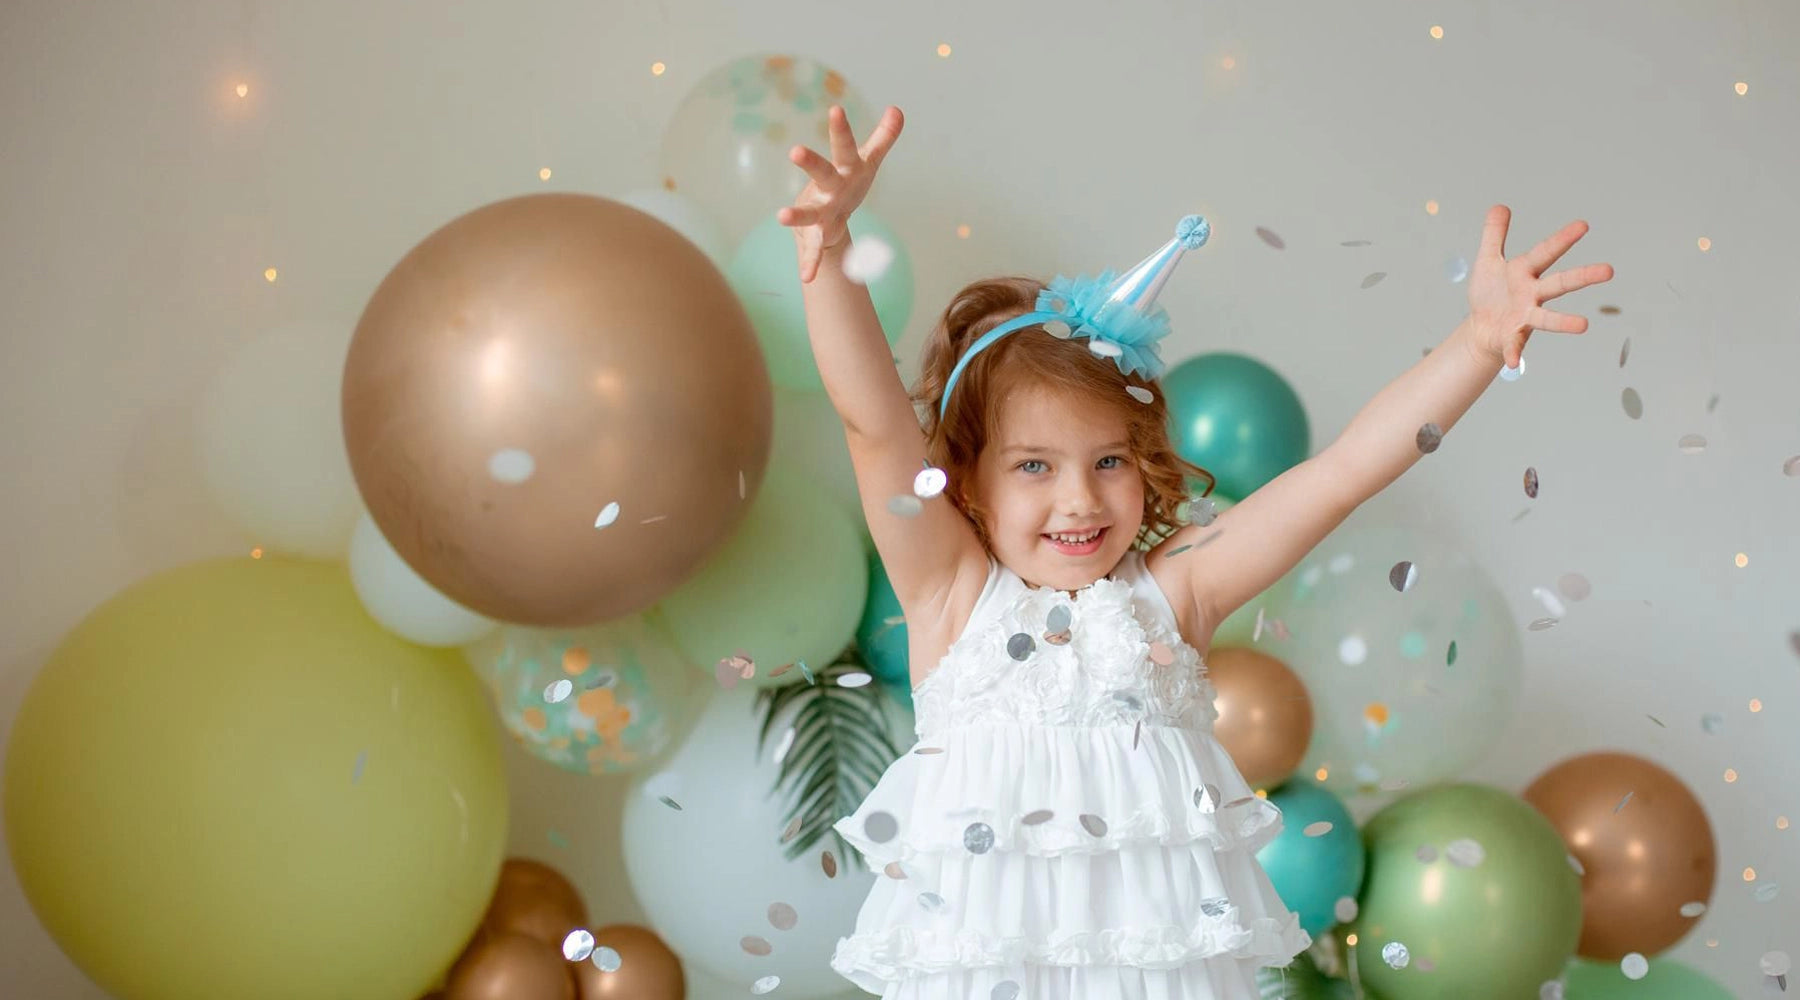 Shimmer & Confetti: Party Supplies, Favors, Balloon Arch & Decorations